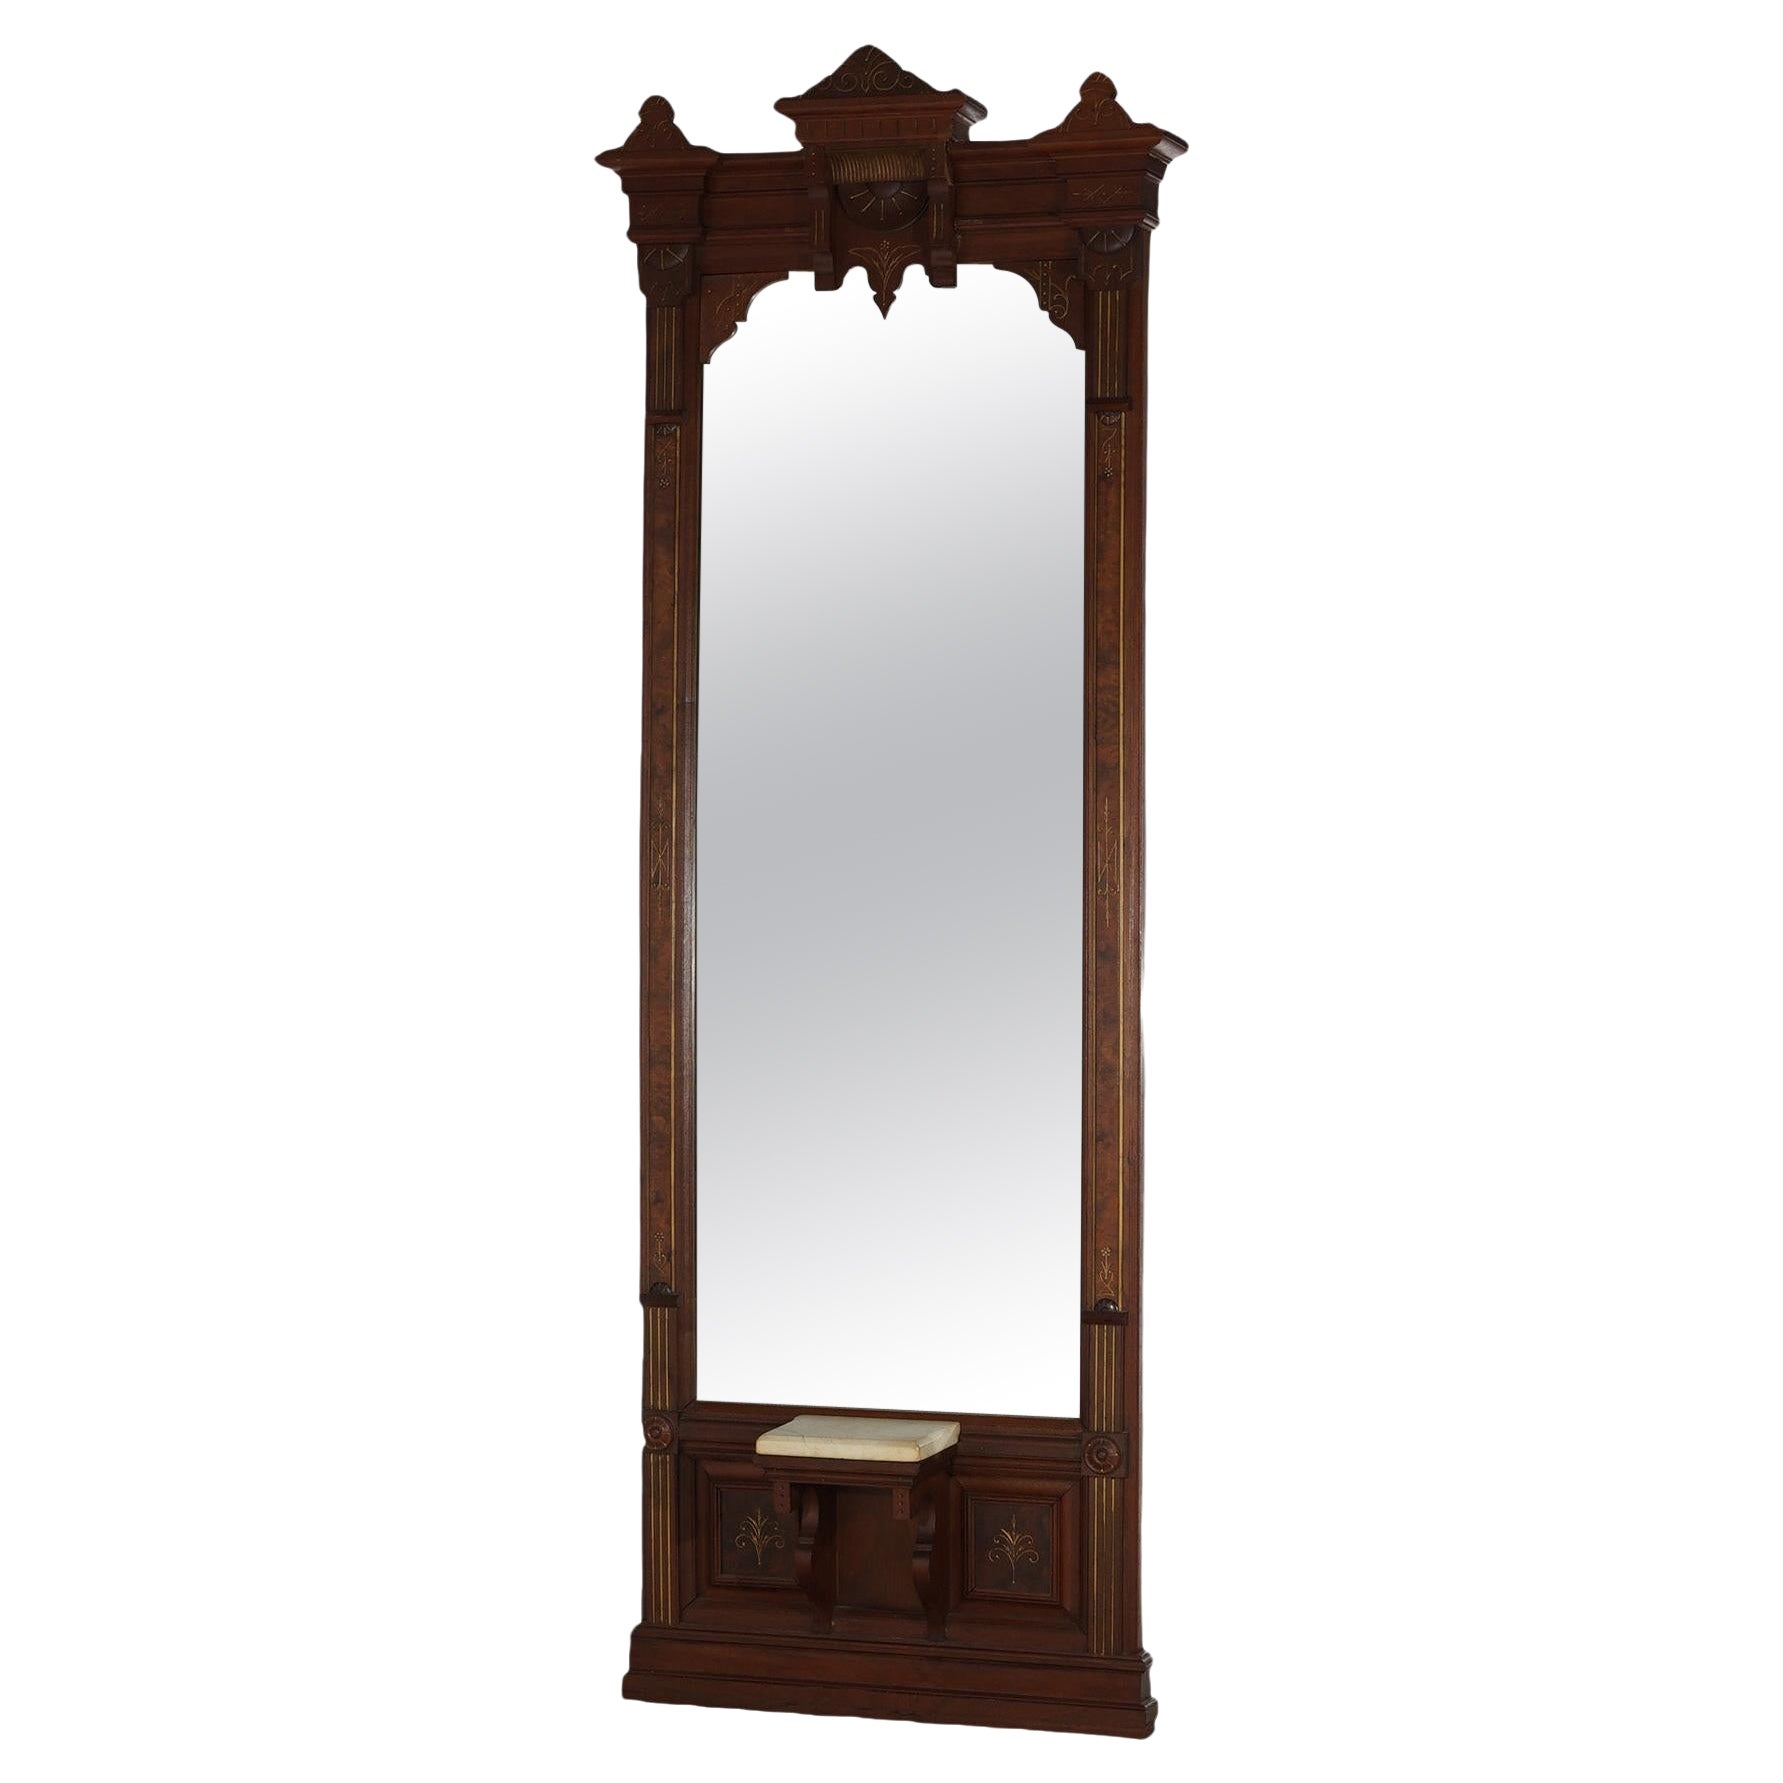 Renaissance Revival Pier Mirrors and Console Mirrors